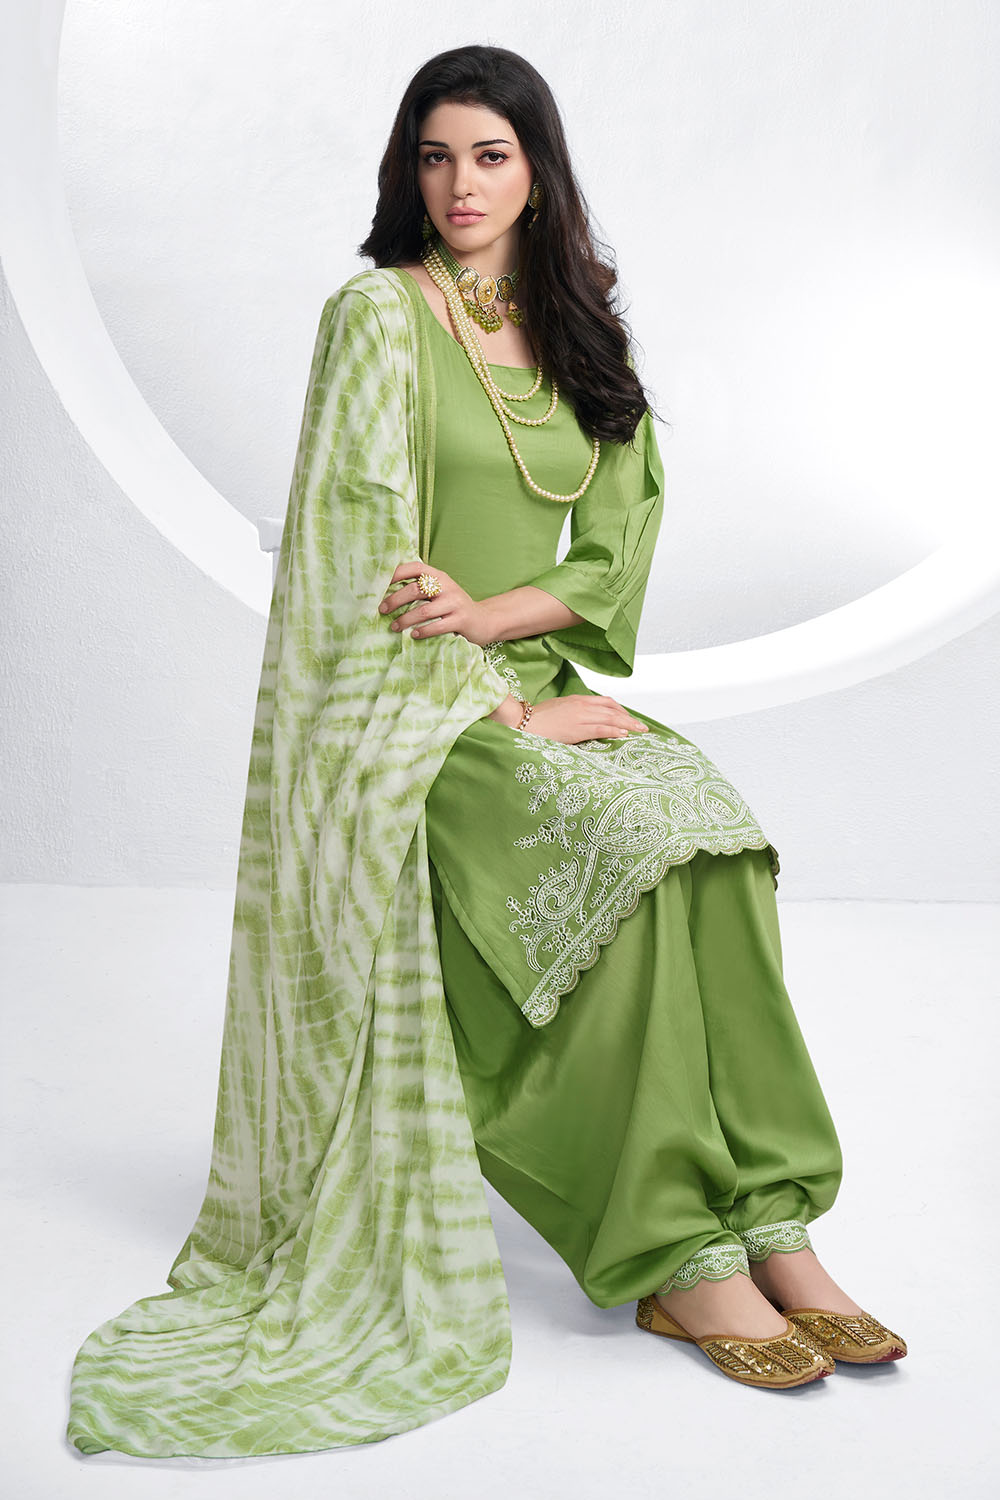 Green Color Cotton Hemline Embroidered Unstitched Suit Material